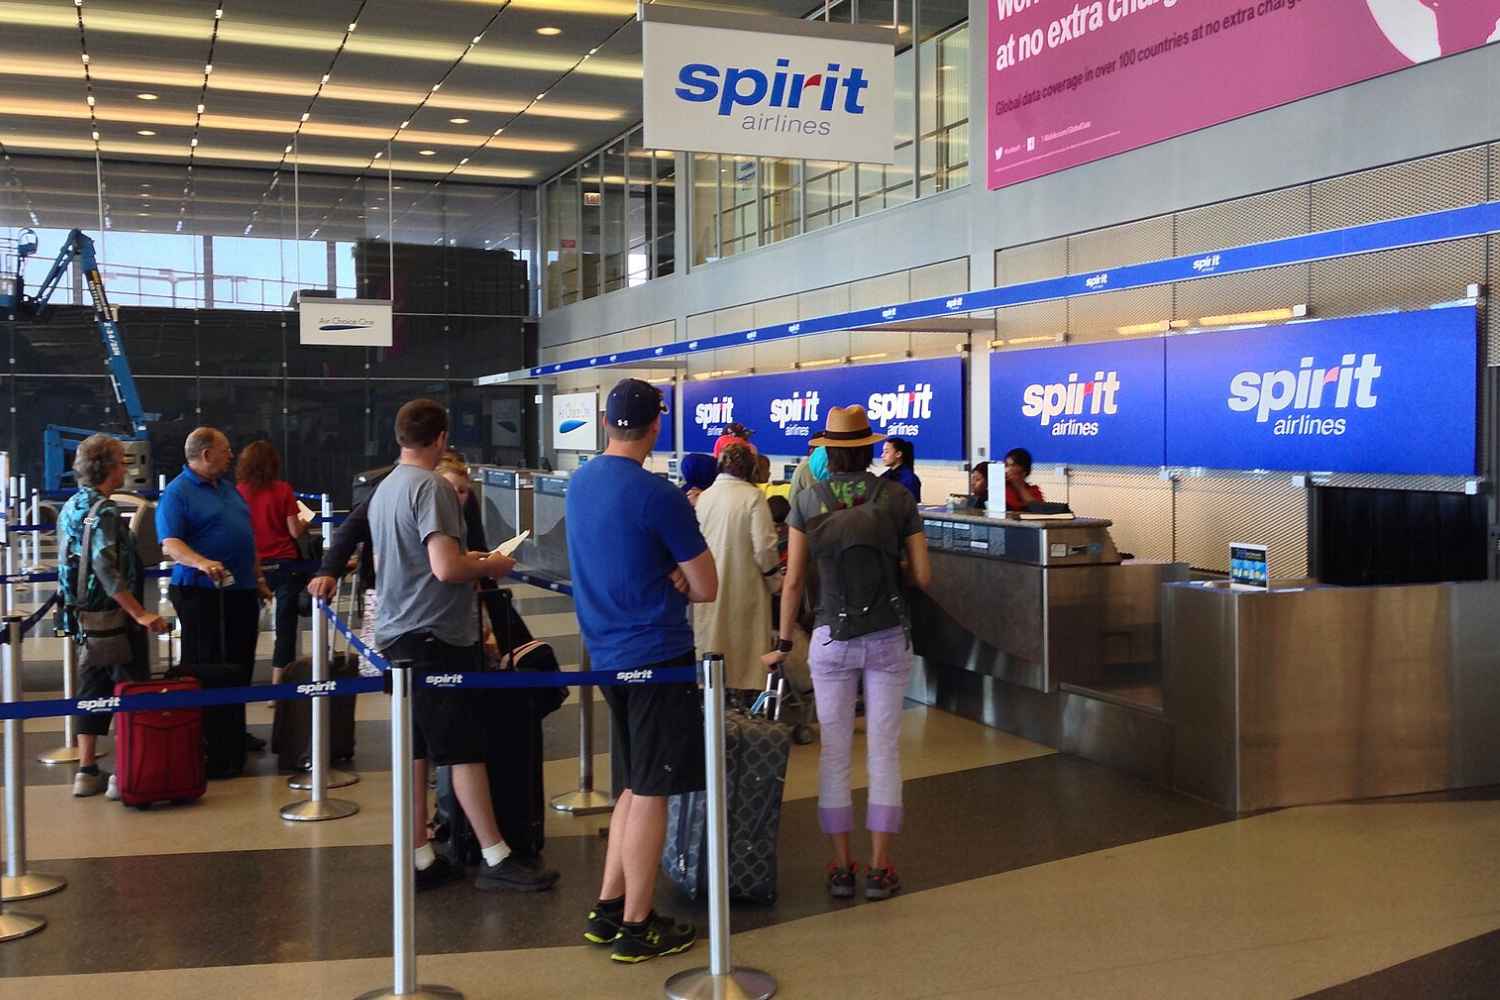 passengers waiting in queue for cheking in their luggage at the spirit airlines check in counter: why are spirit and frontier so cheap